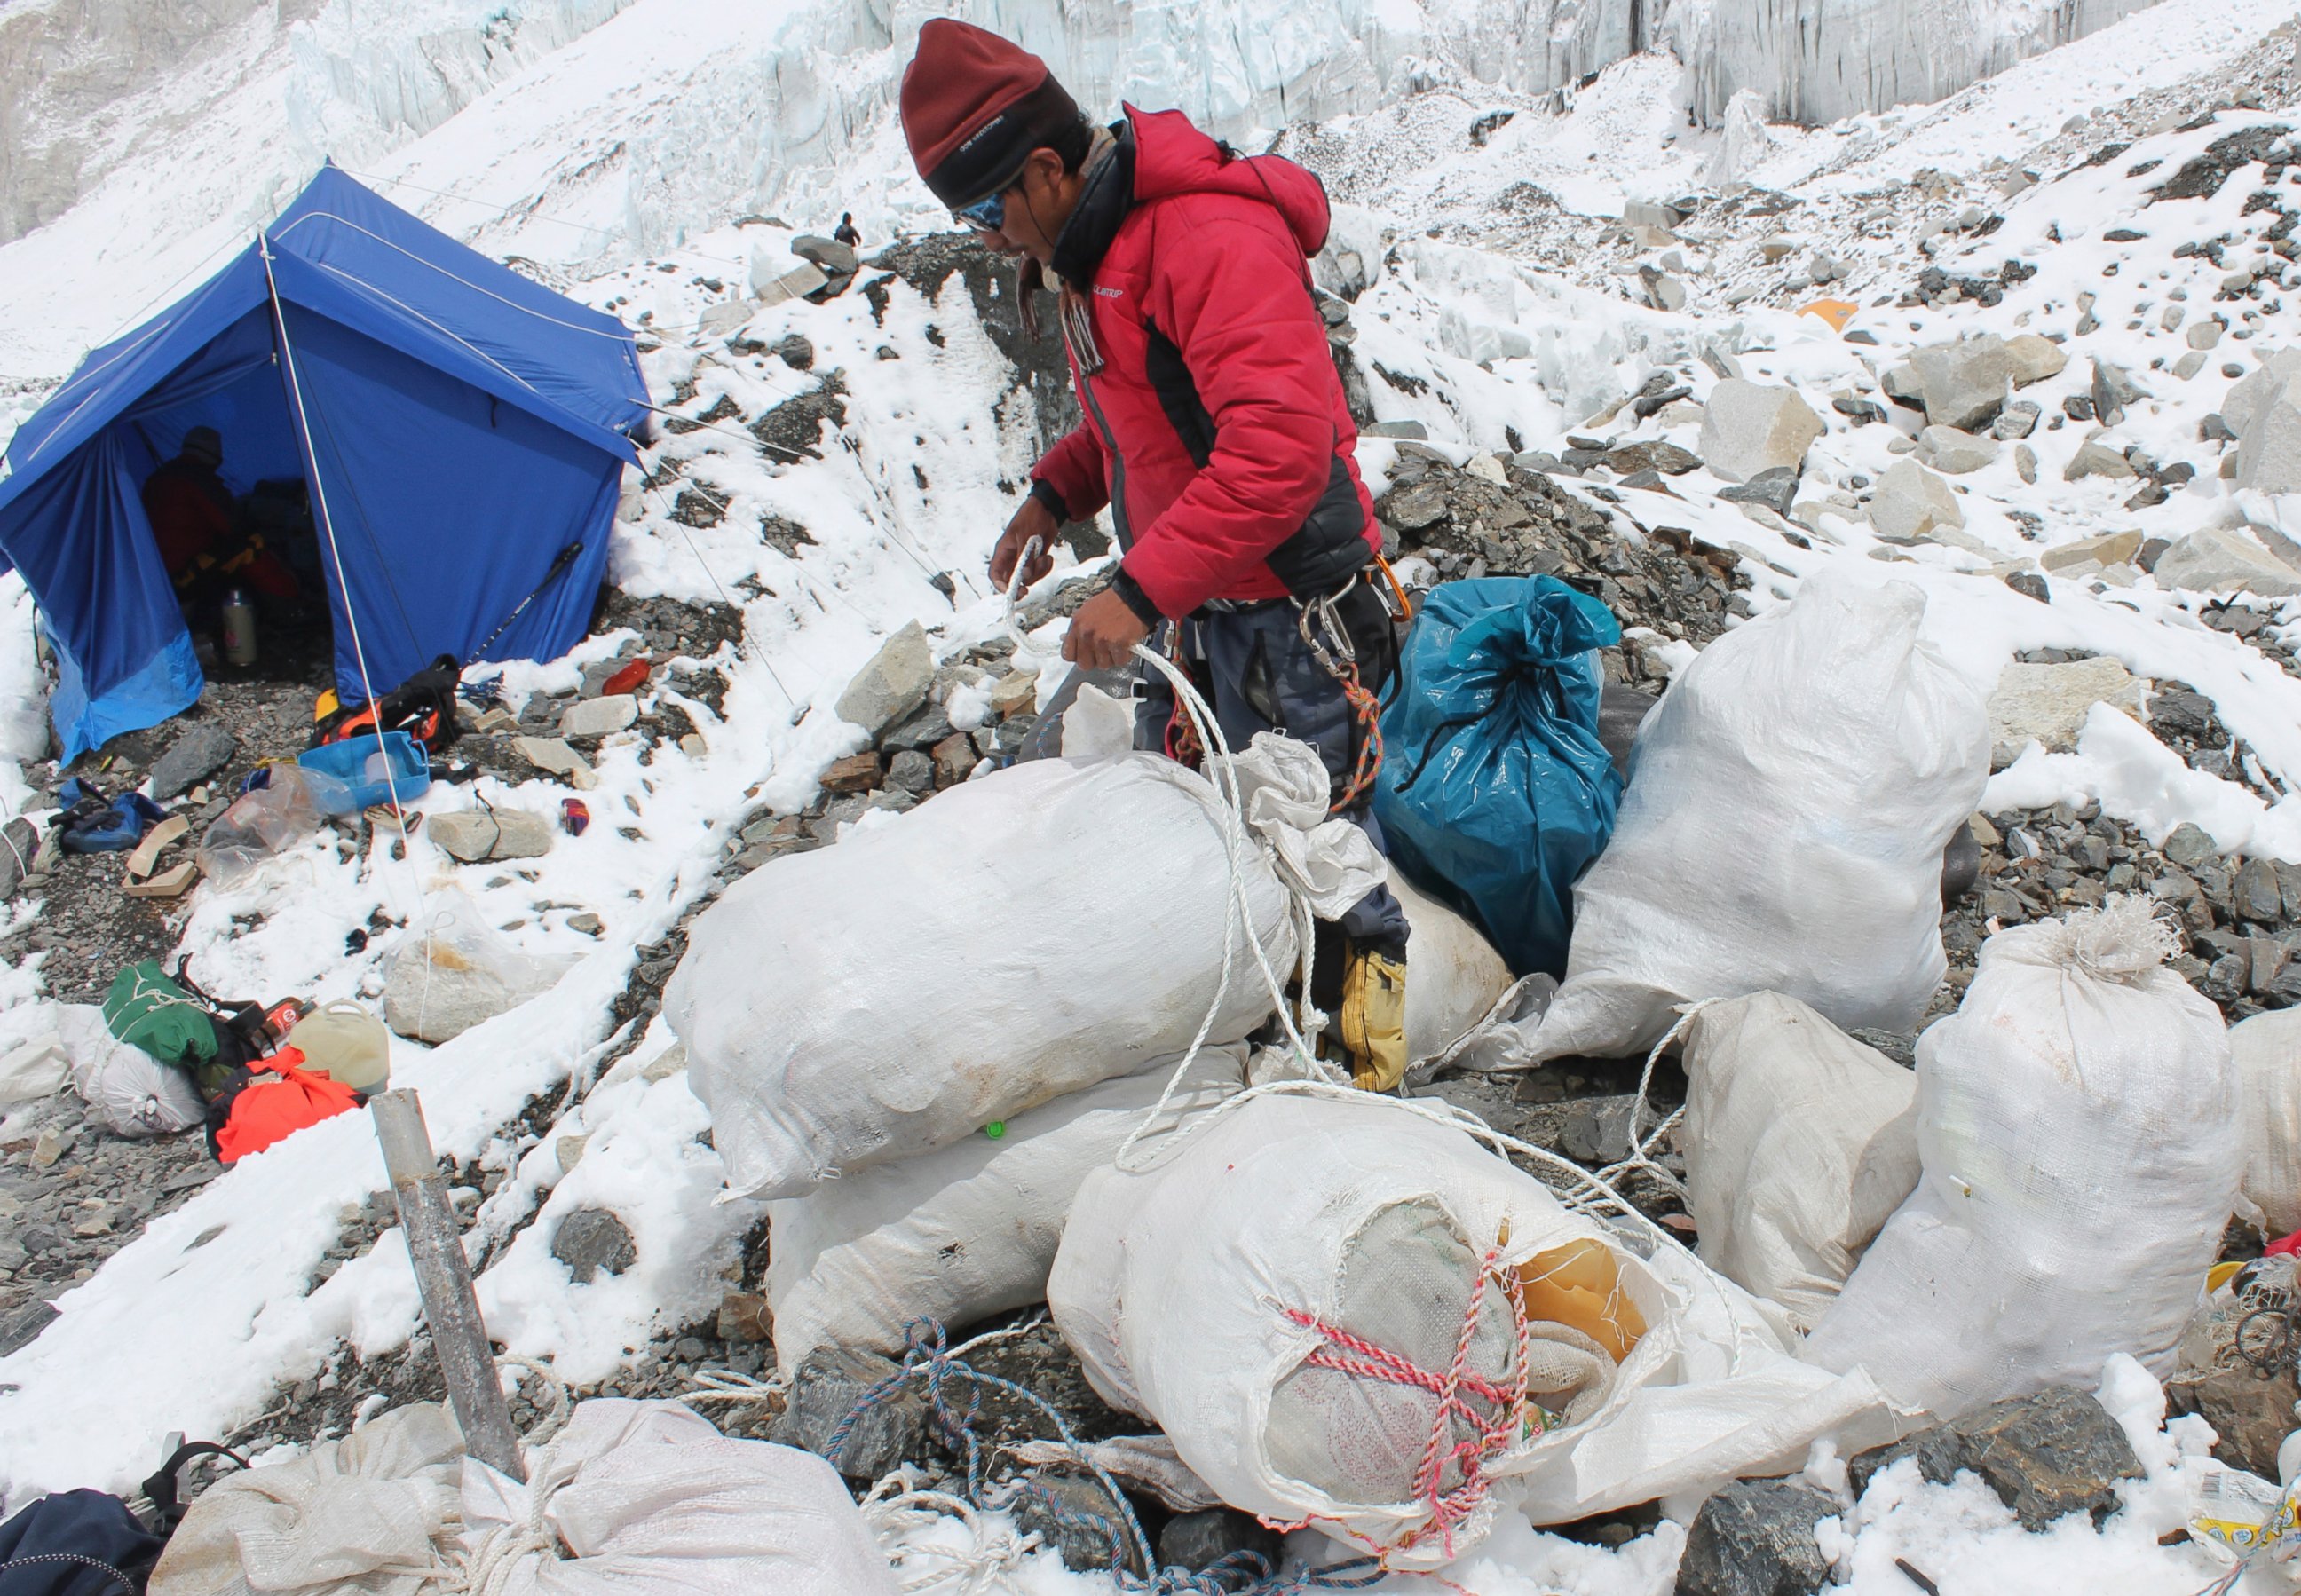 PHOTO: This picture taken on May 26, 2010 shows a Nepalese sherpa packing garbage collected from the Everest clean-up expedition at Everest Base Camp. 